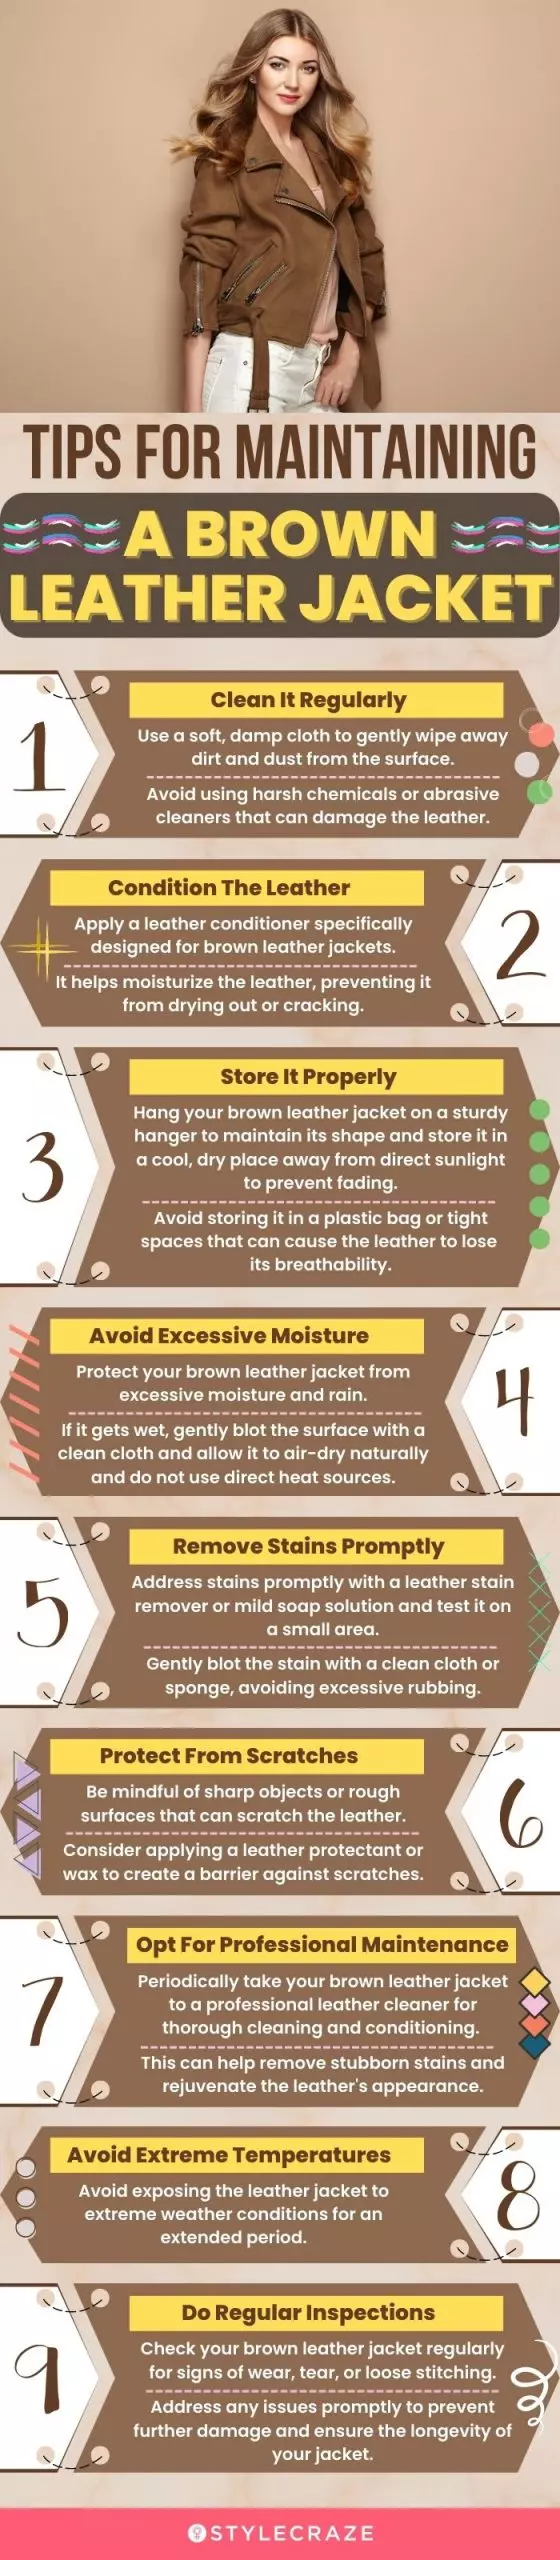 Tips For Maintaining Brown Leather Jackets